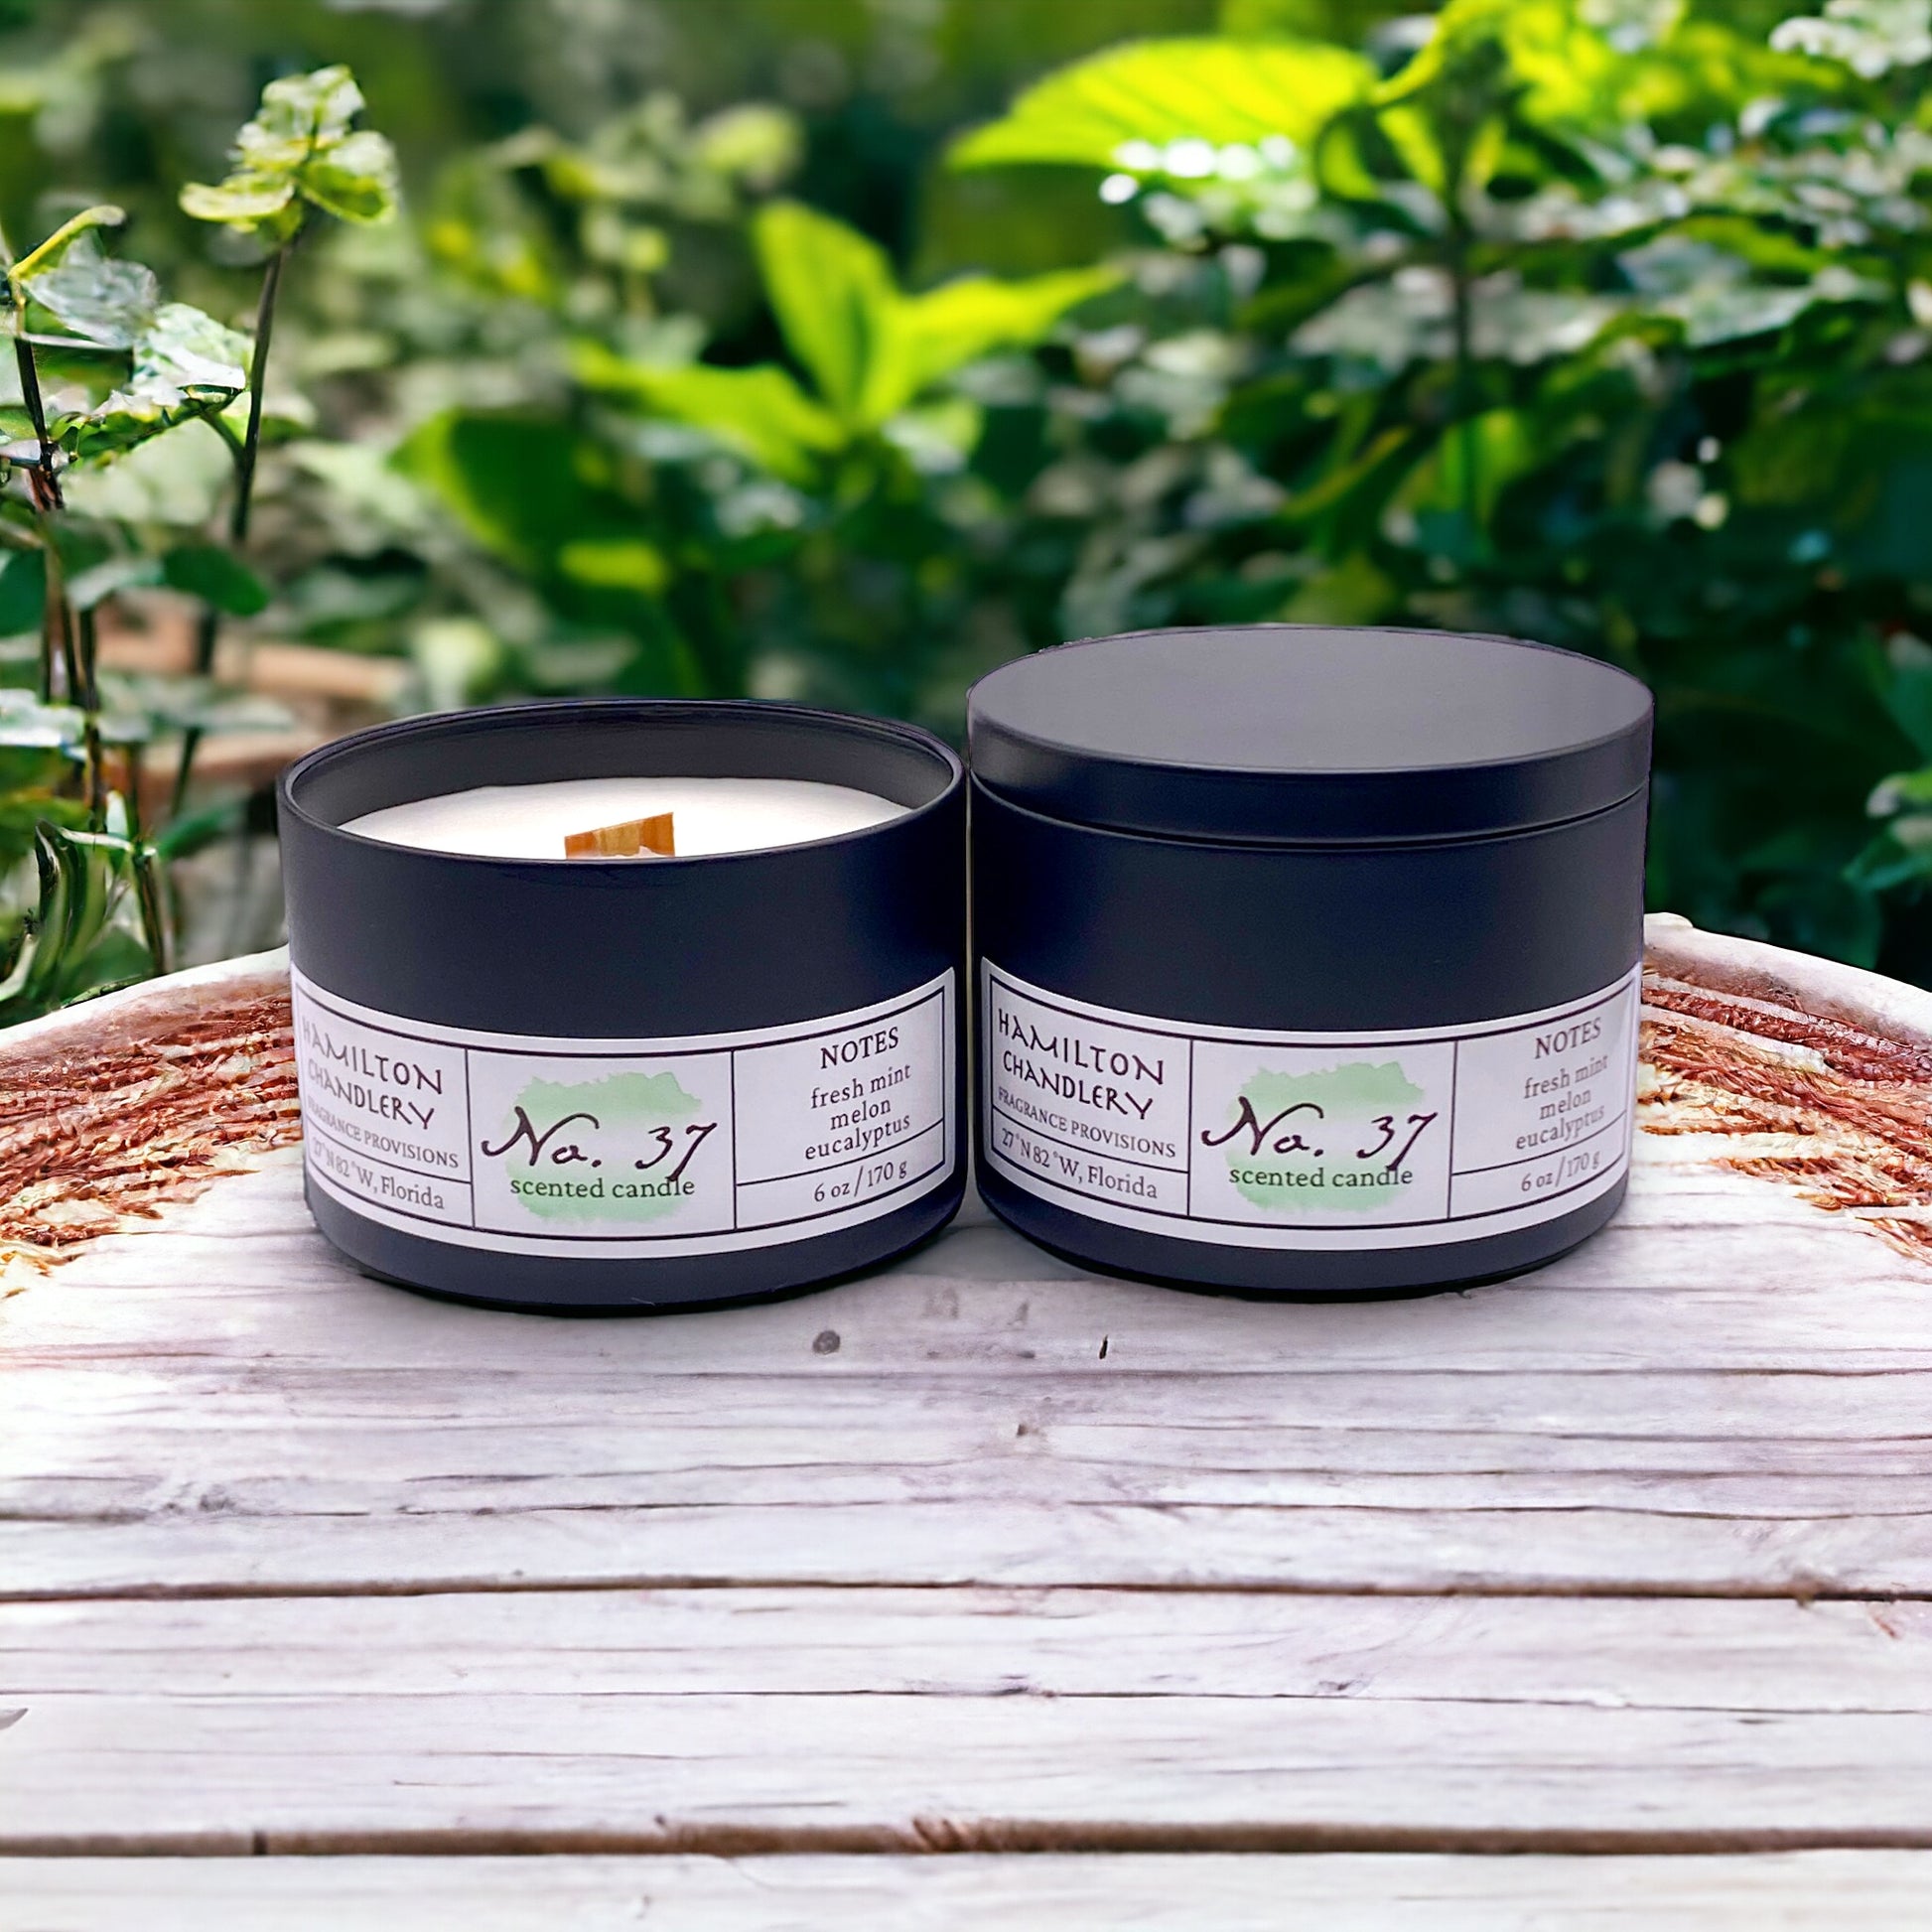 Fragrance No. 37 Travel Tin Candles on Wooden Table with Mint Garden in Background | Hamilton Chandlery